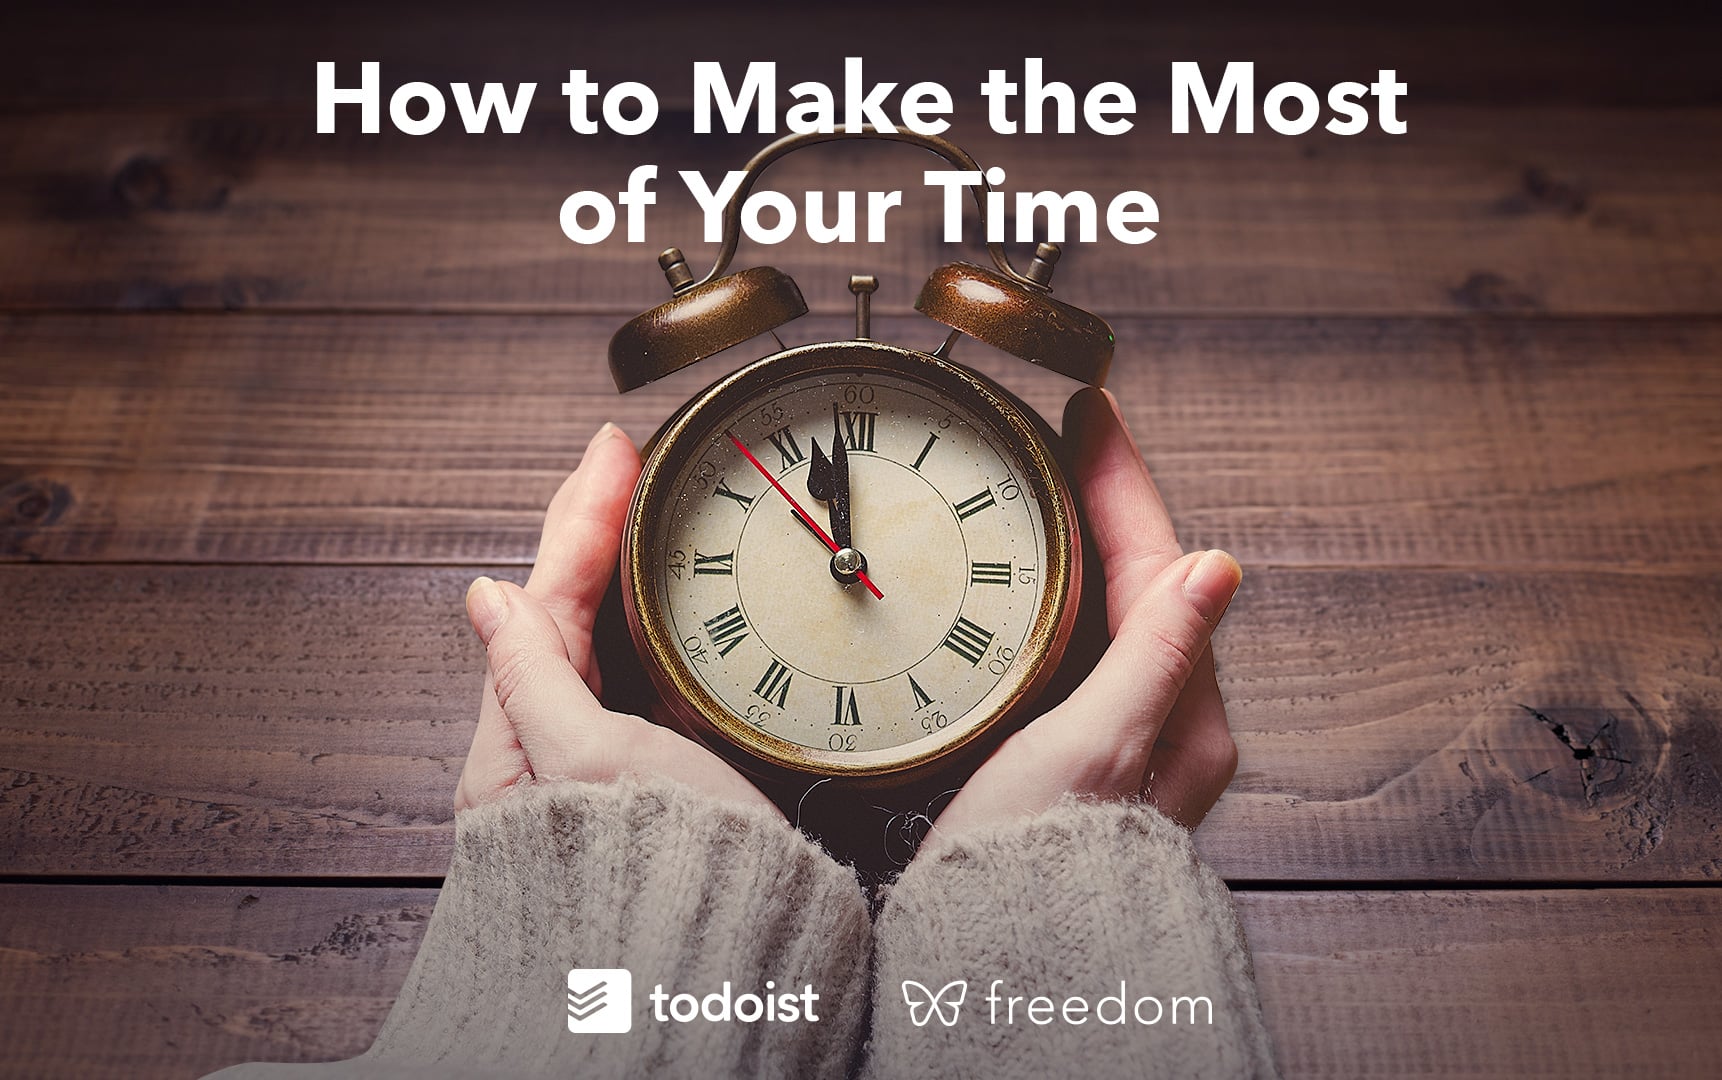 Todoist & Freedom how to make the most of your time